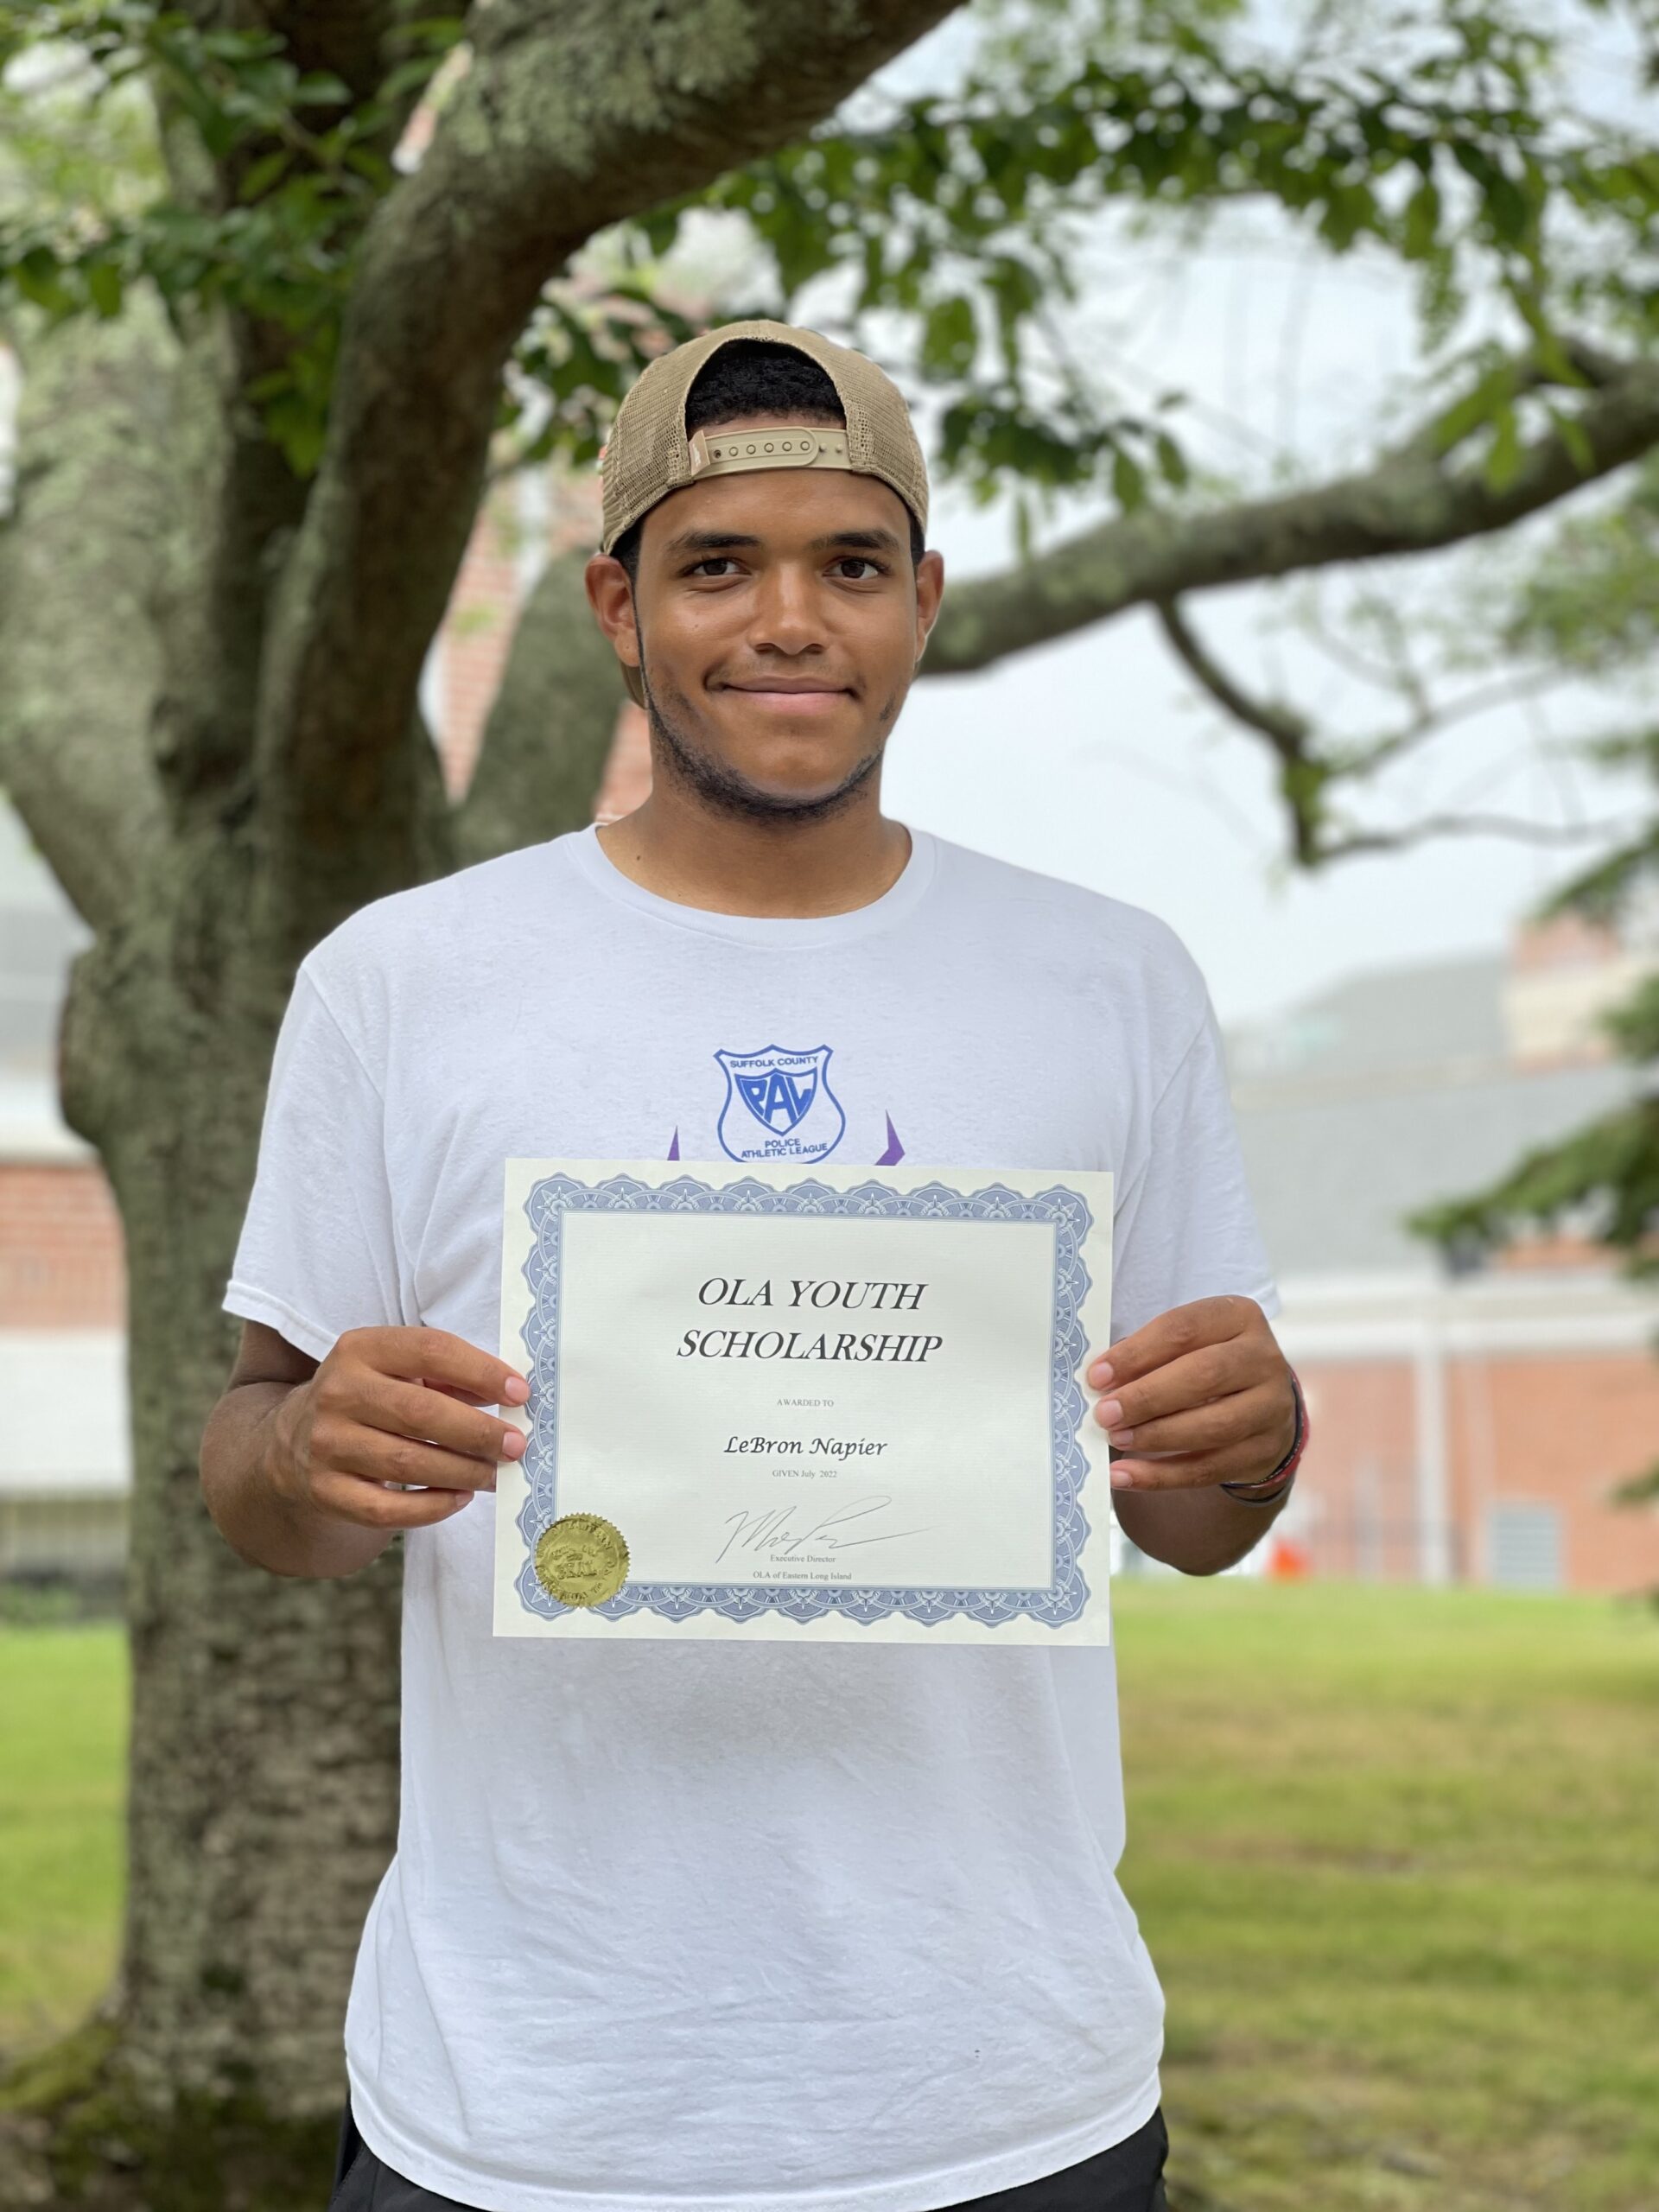 LeBron Napier was among the recipients of an OLA scholarship.